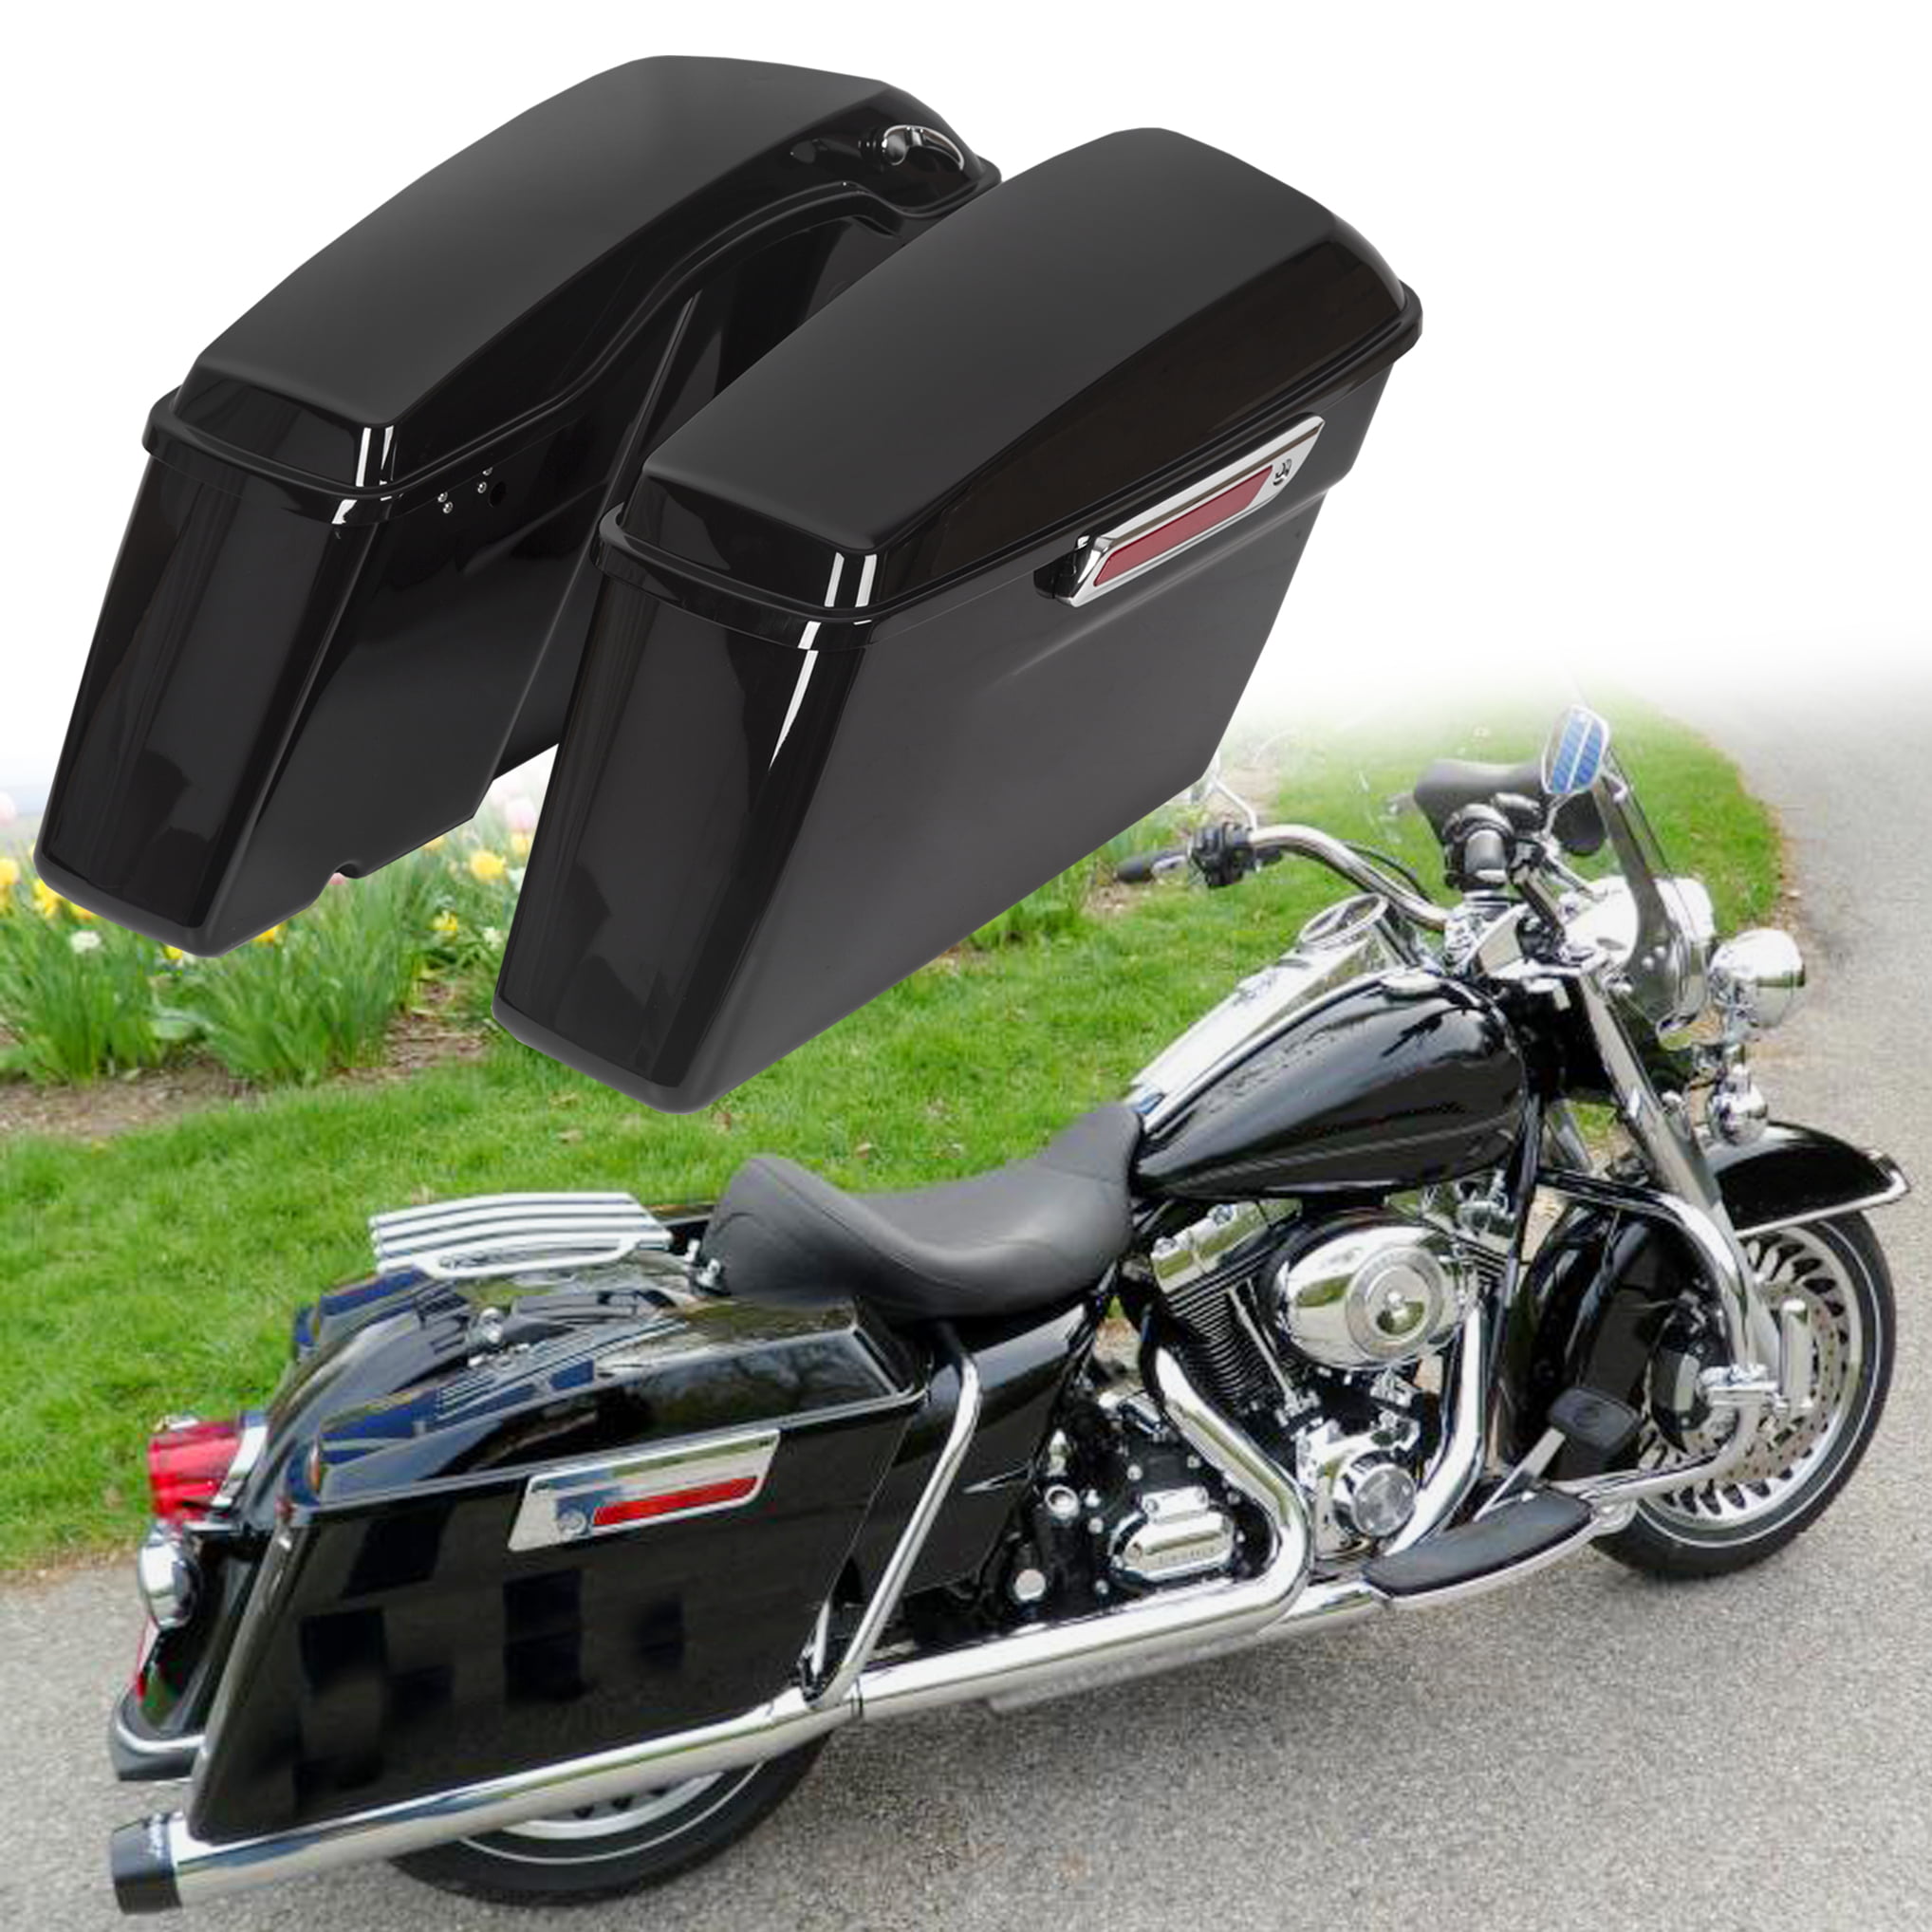 Motorcycle Right Side Saddle Bag Storage For Harley Sportster XL883/1200 #4 